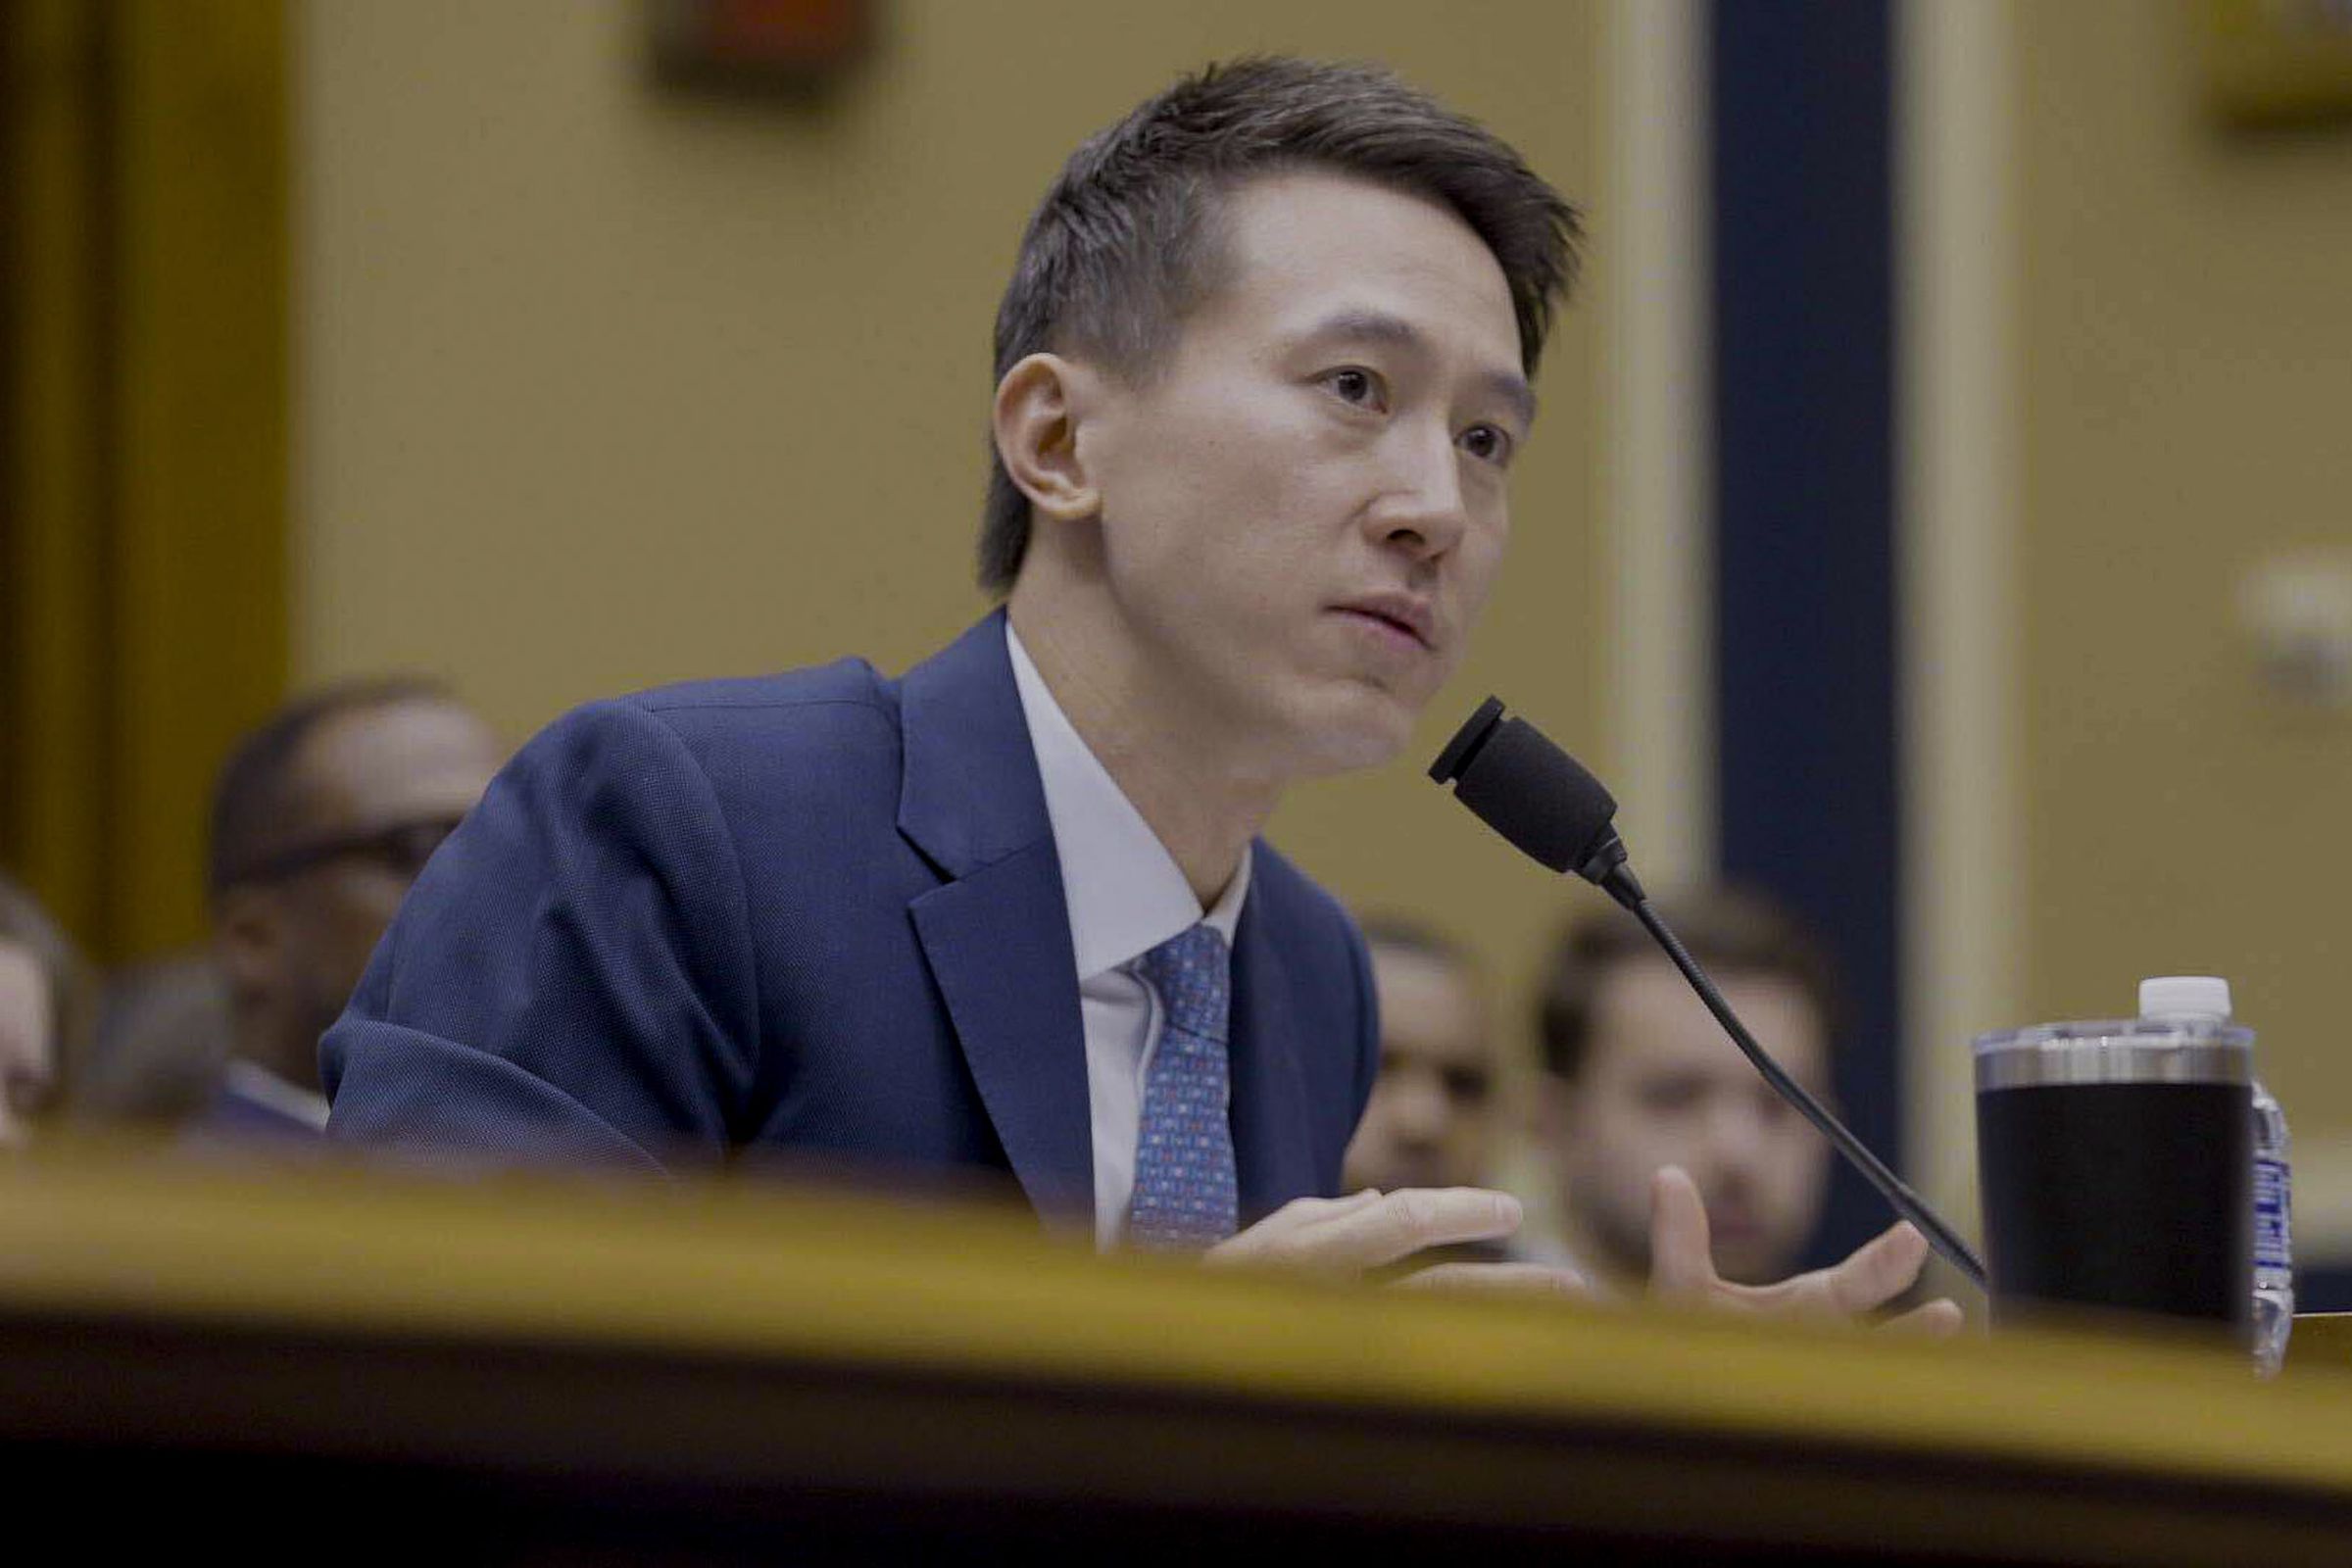 TikTok CEO Shou Zi Chew appears before Congress to defend the platform against a ban.